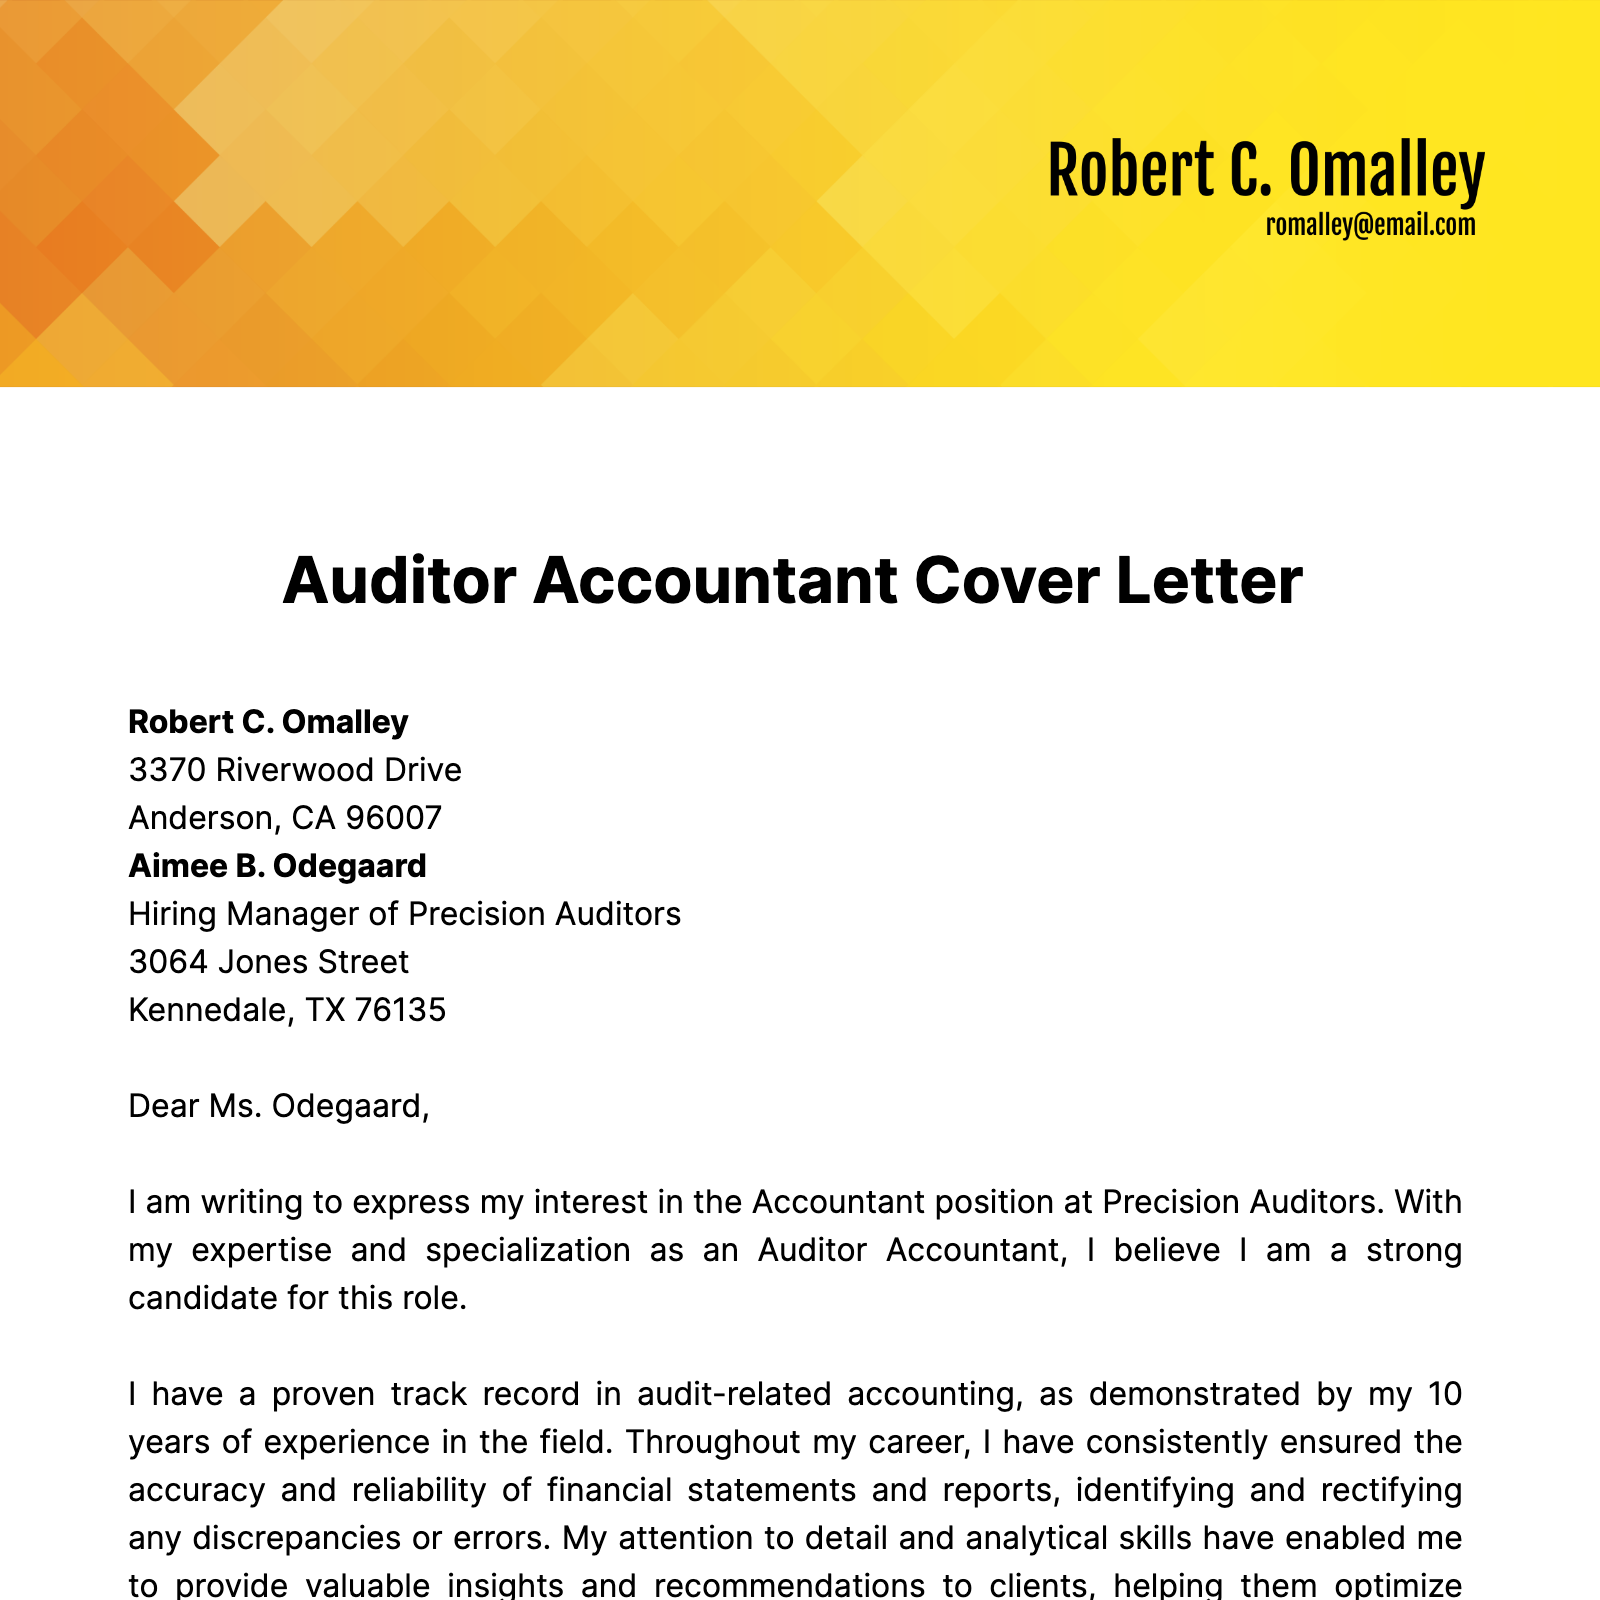 Auditor Accountant Cover Letter Template